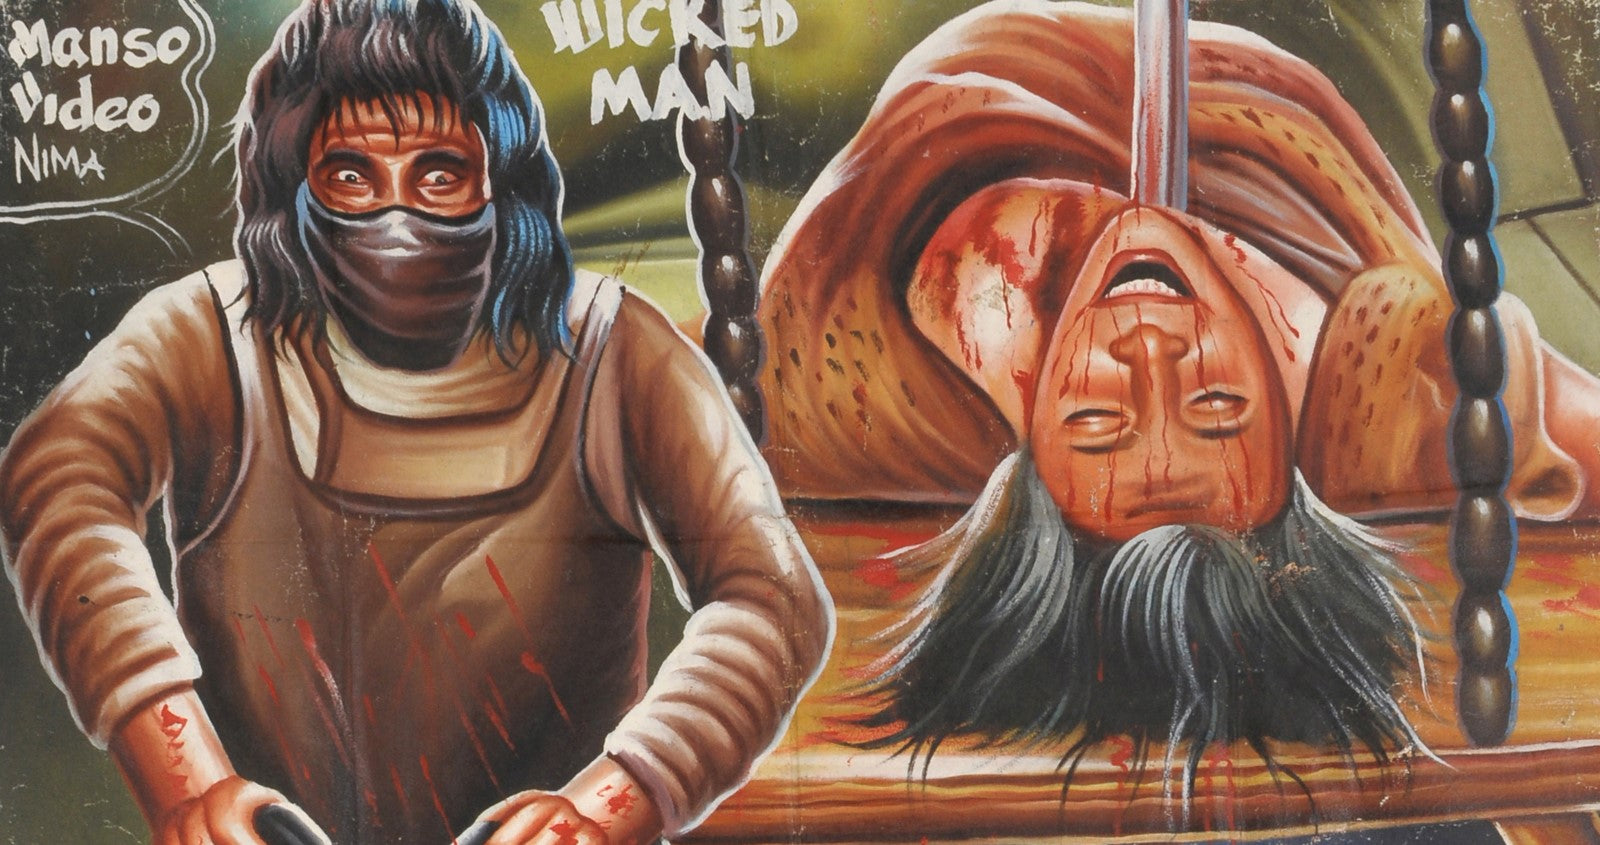 THE TEXAS CHAINSAW MASSACRE MOVIE POSTER HAND PAINTED IN GHANA FOR THE LOCAL CINEMA DETAILS